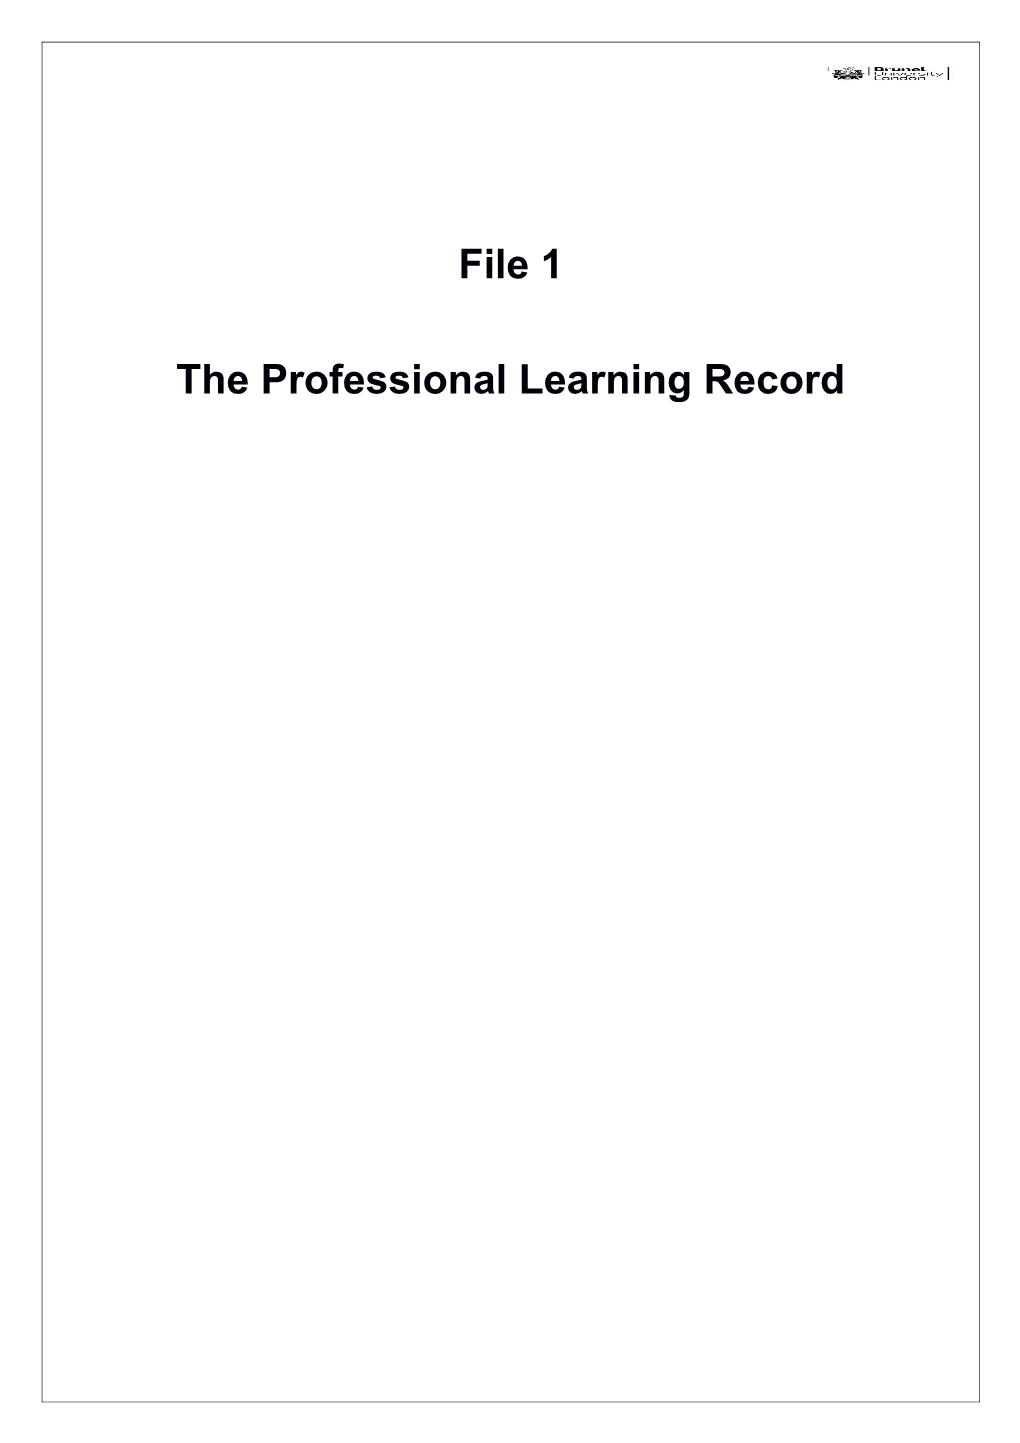 The Professional Learning Record